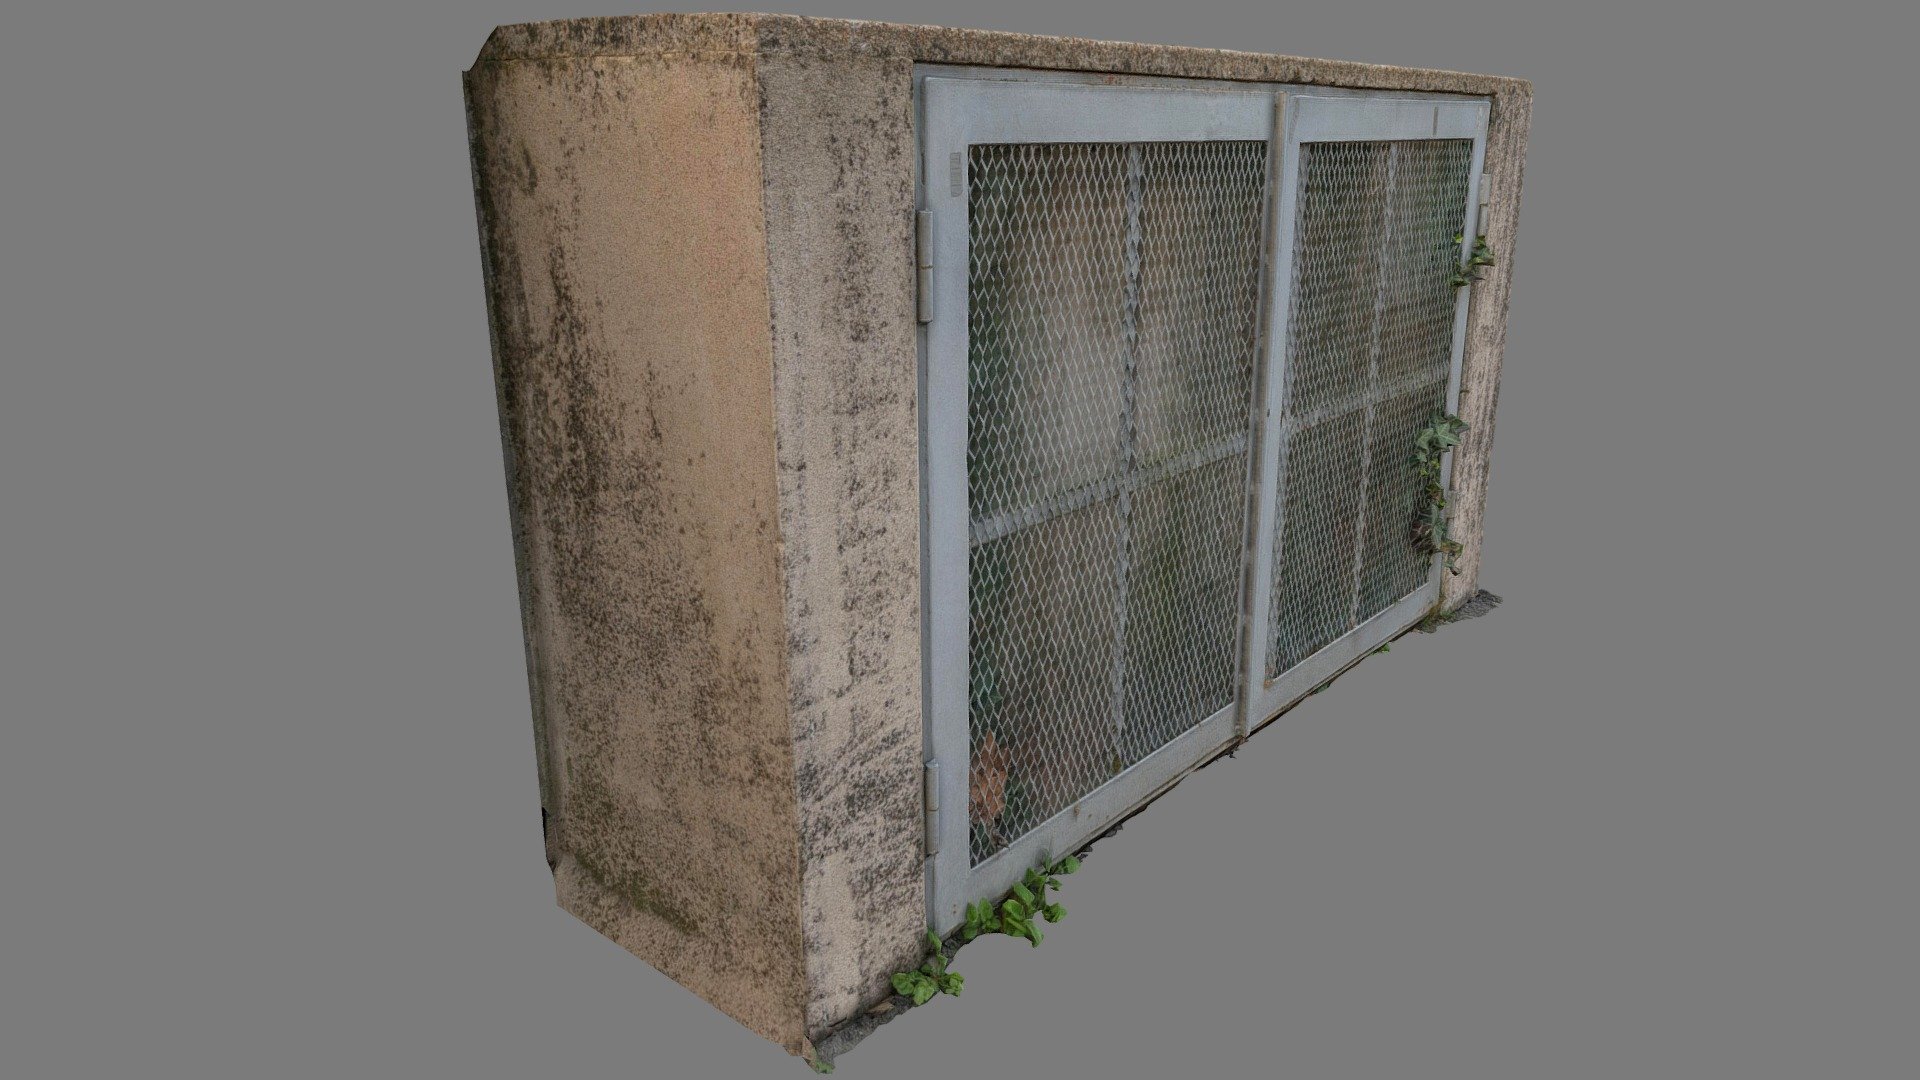 Electric box scan No. 15

Street props

Urban &amp; Industrial collections

Good for adding realism to your urban / abandoned scenes

diffuse/normal - Electric box scan No. 15 - Buy Royalty Free 3D model by 3Dystopia (@Dystopia) 3d model